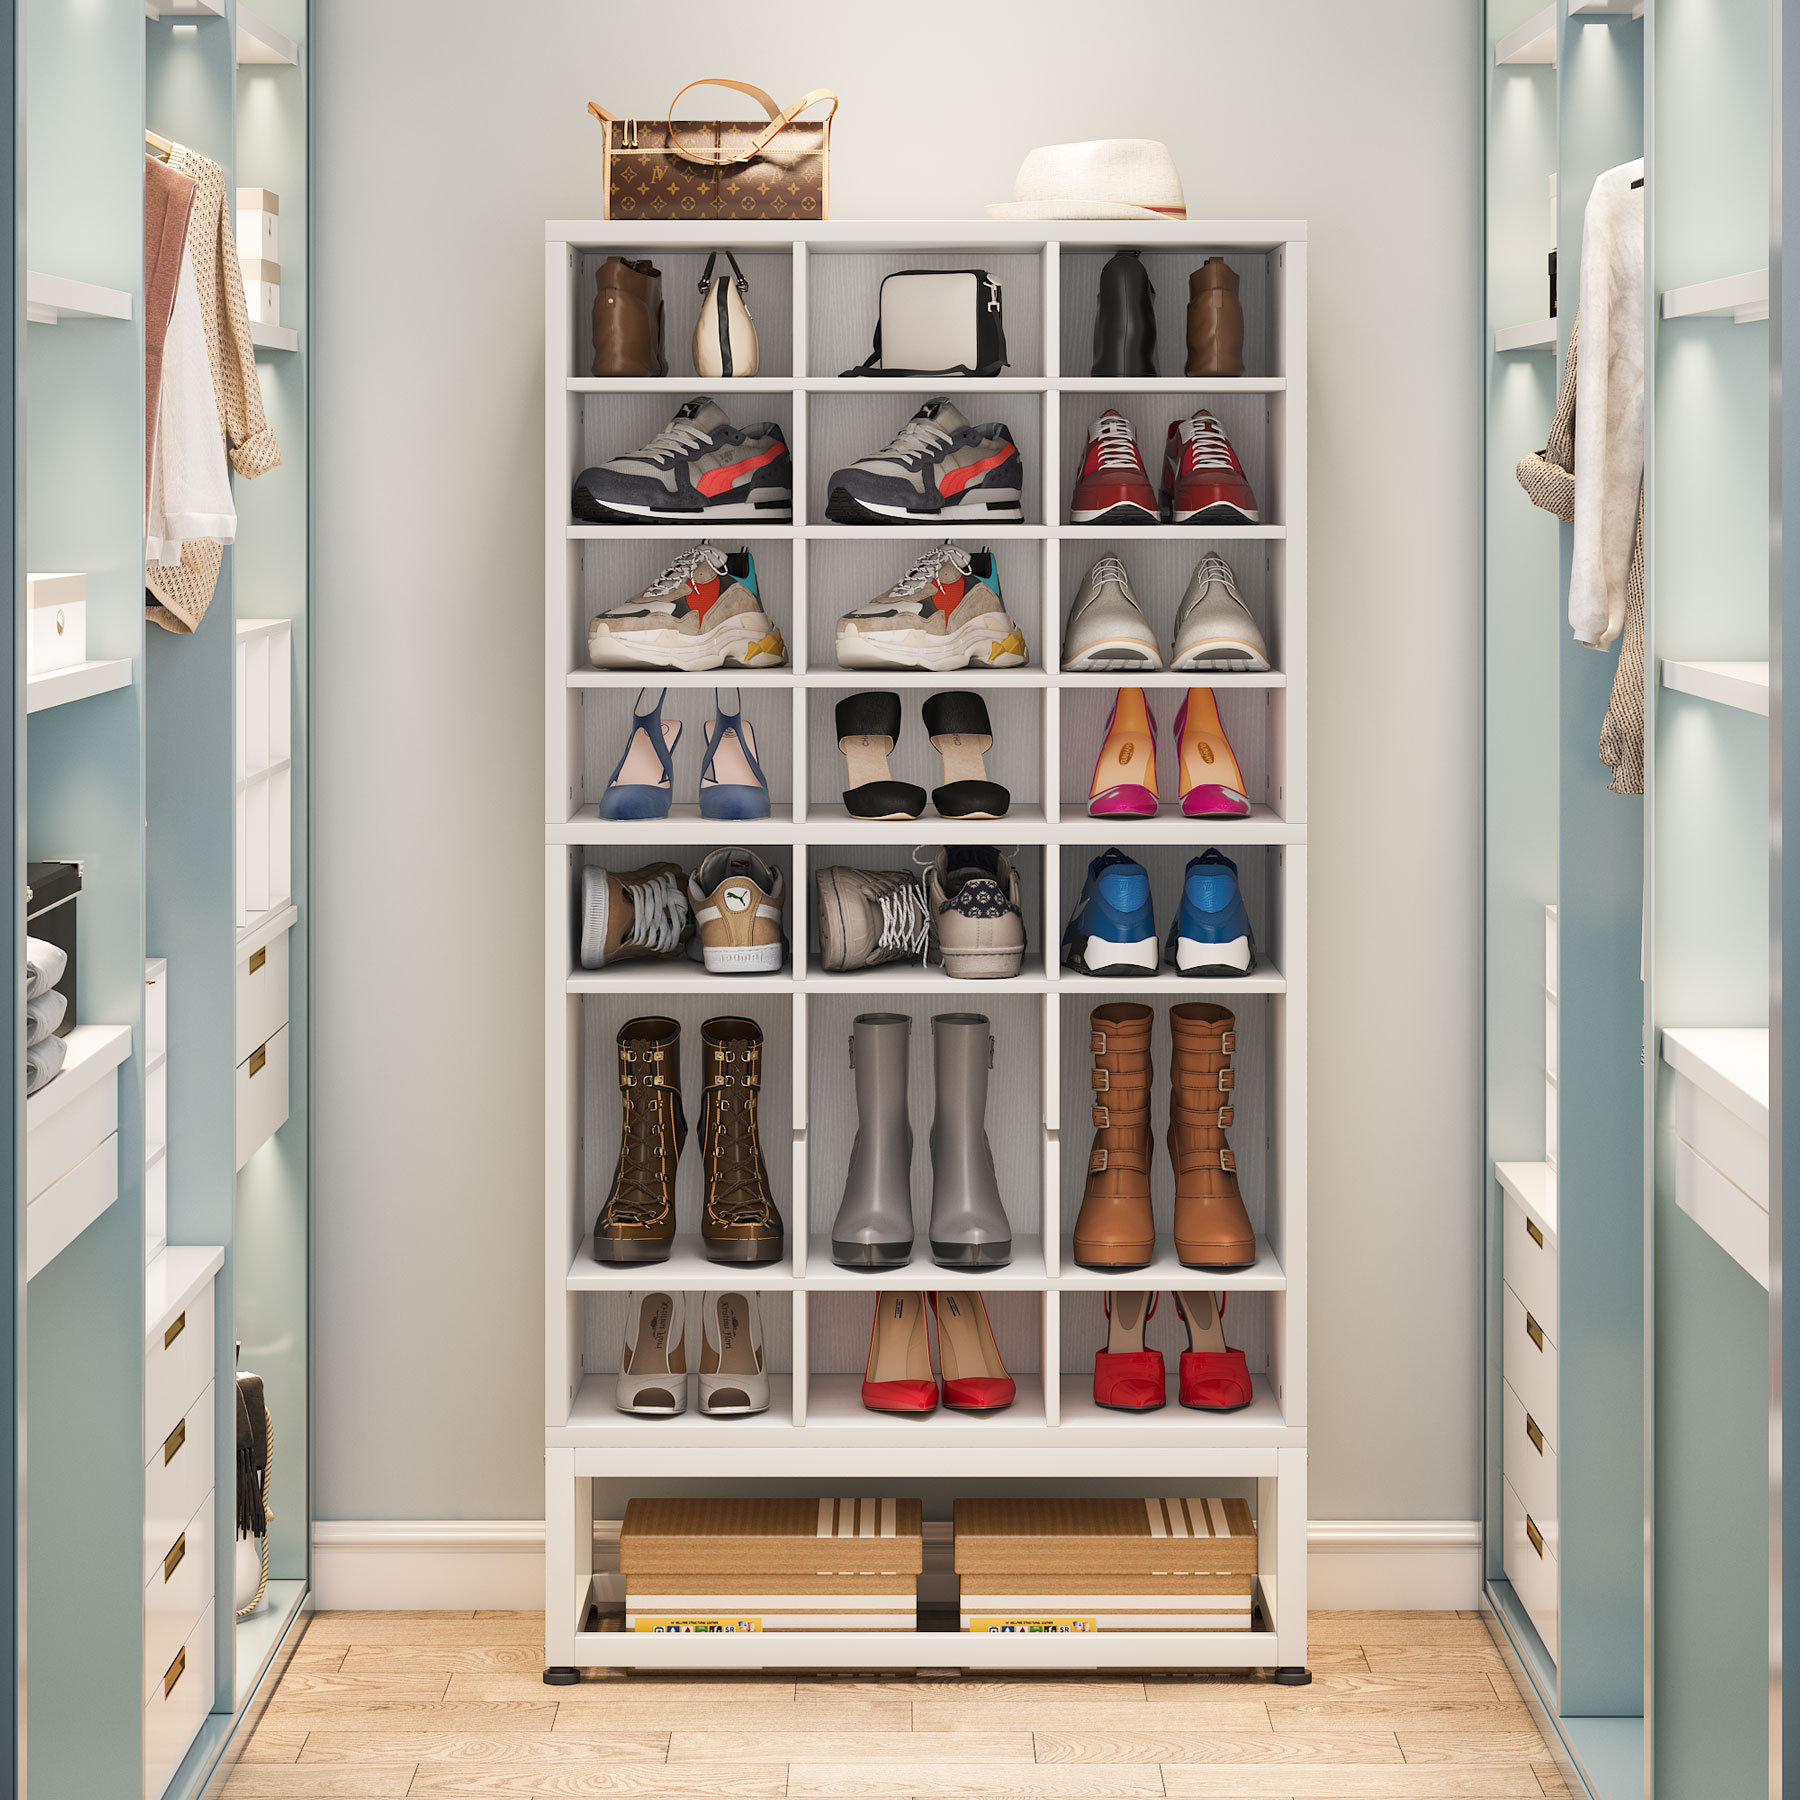 The 9 Best Shoe Racks of 2023 for Ample Organization, According to